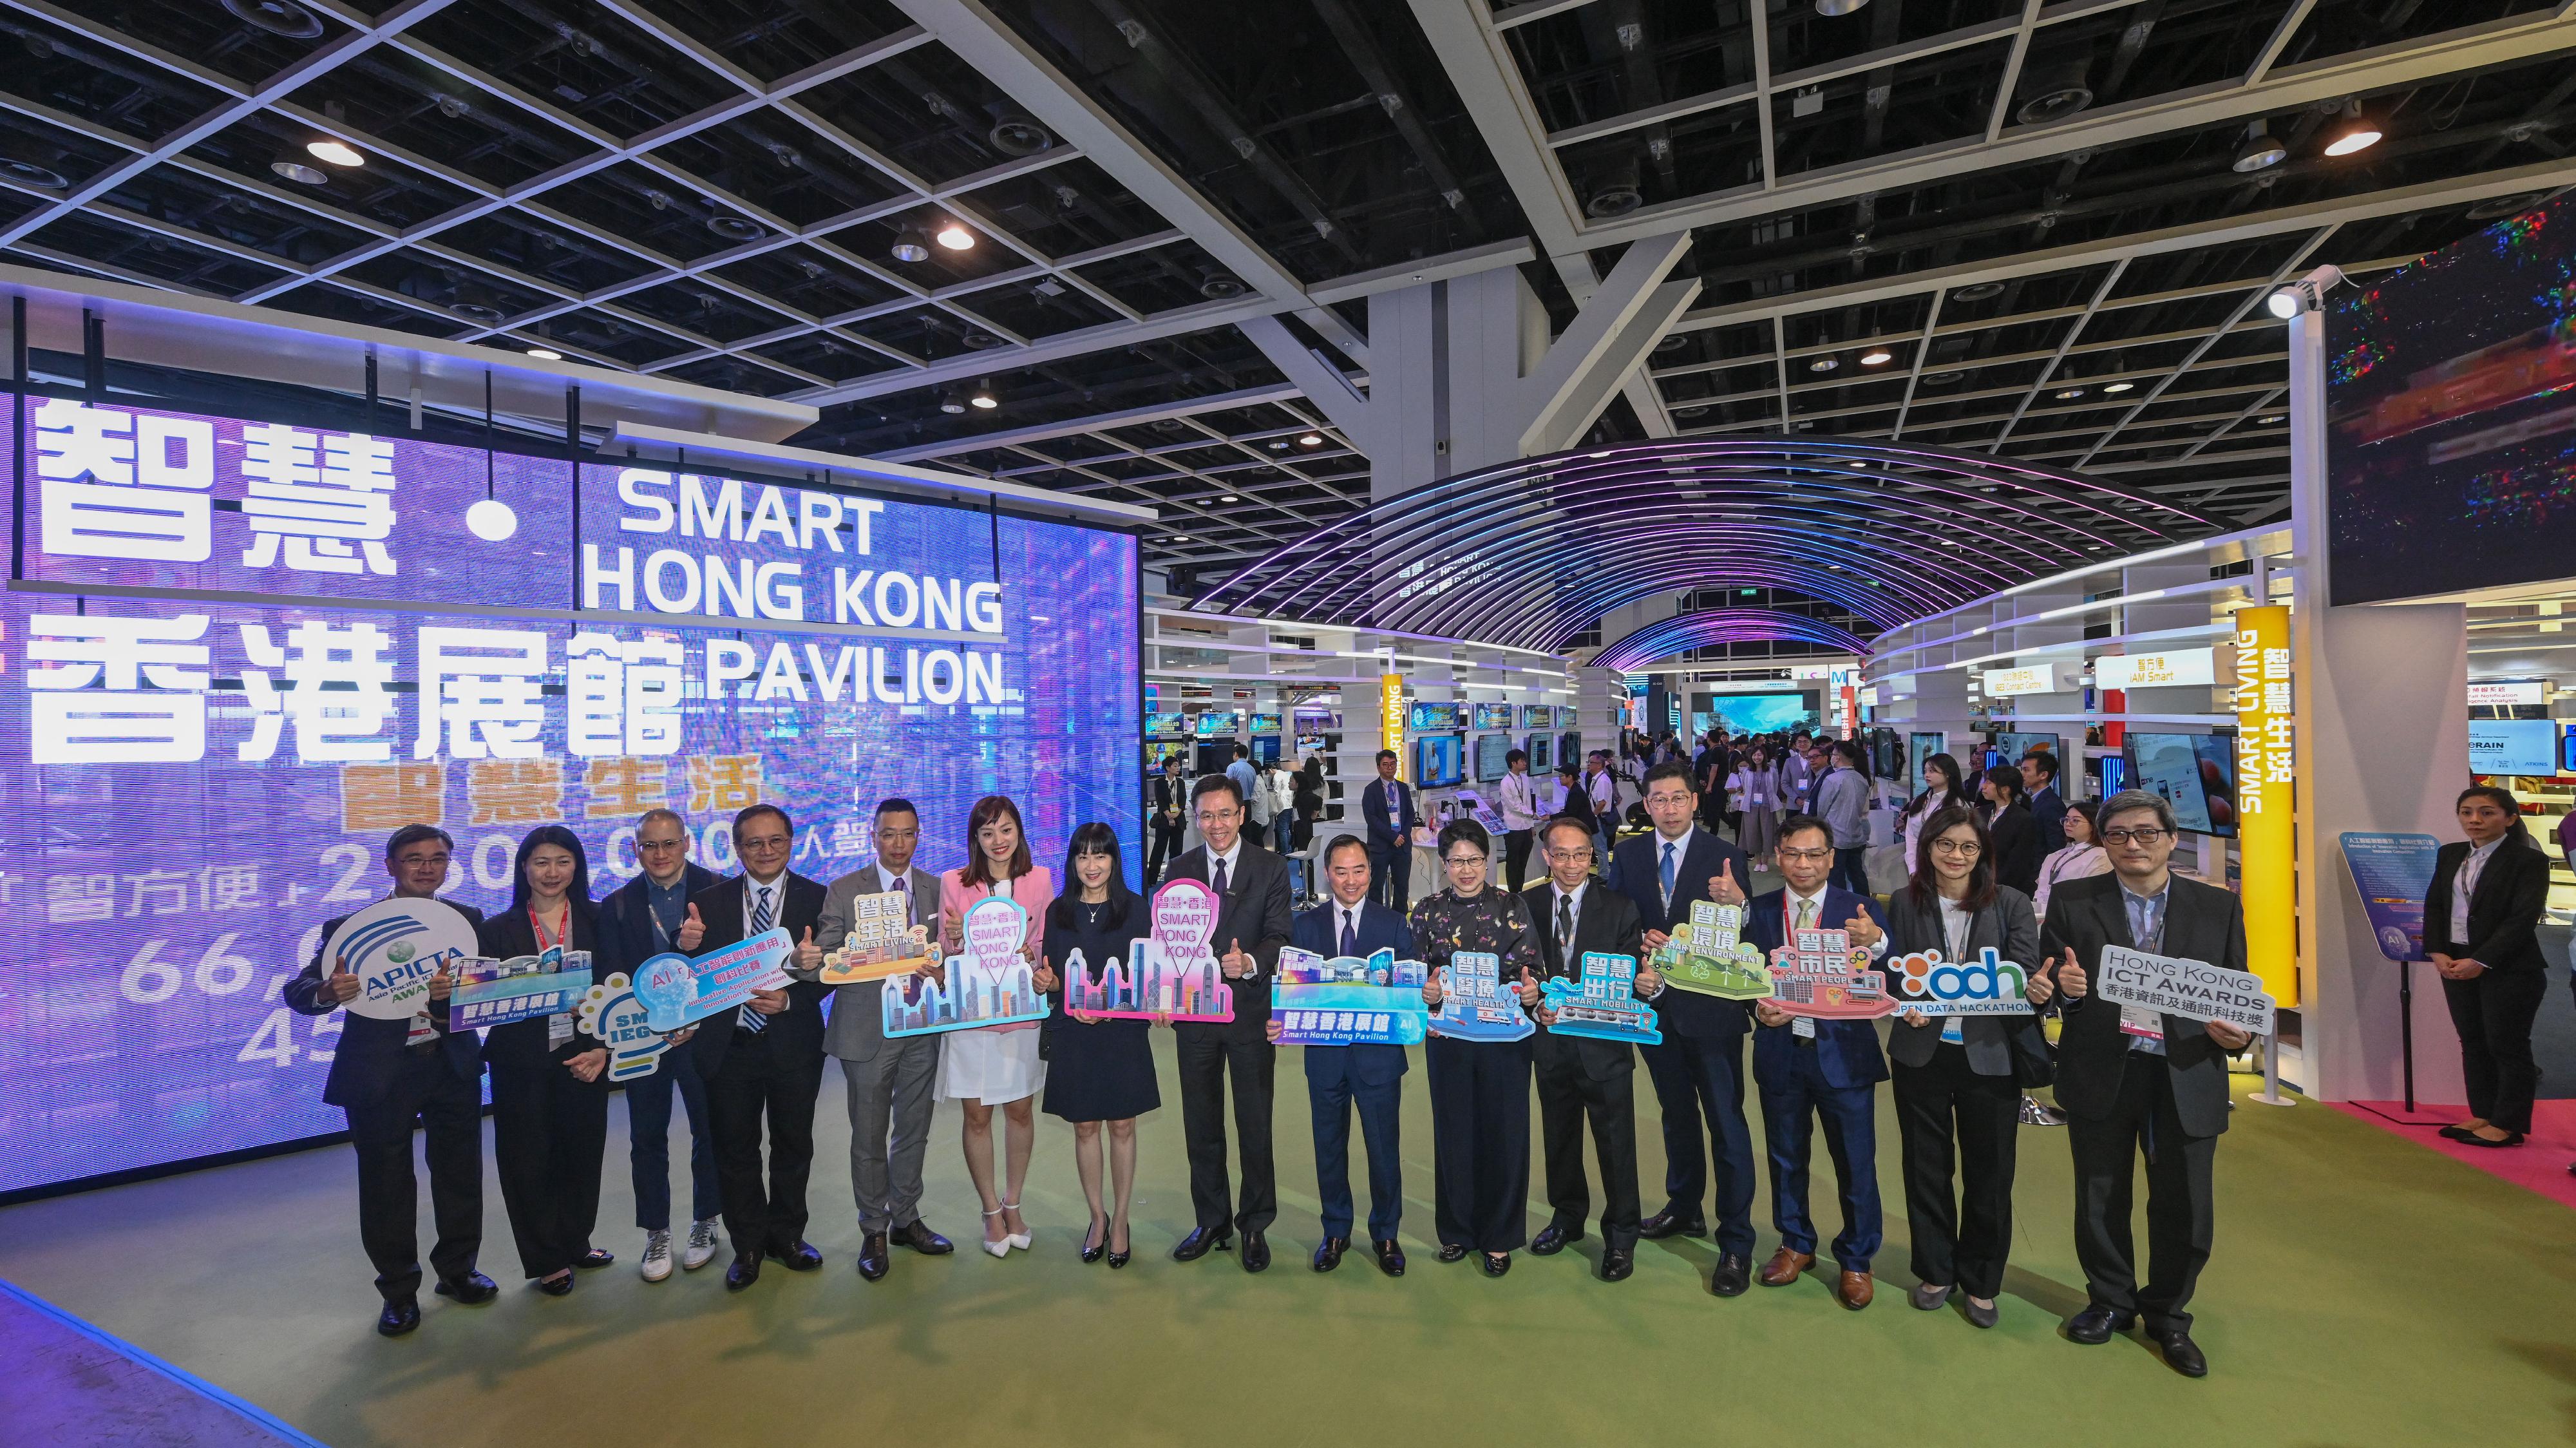 The Secretary for Innovation, Technology and Industry, Professor Sun Dong, visited the "Smart Hong Kong Pavilion" at InnoEX today (April 13). Professor Sun (centre) is pictured with the Under Secretary for Innovation, Technology and Industry, Ms Lillian Cheong (sixth left); the Government Chief Information Officer, Mr Tony Wong (seventh right); the Executive Director of the Hong Kong Trade Development Council, Ms Margaret Fong (seventh left); colleagues from the Office of the Government Chief Information Officer, and other guests.